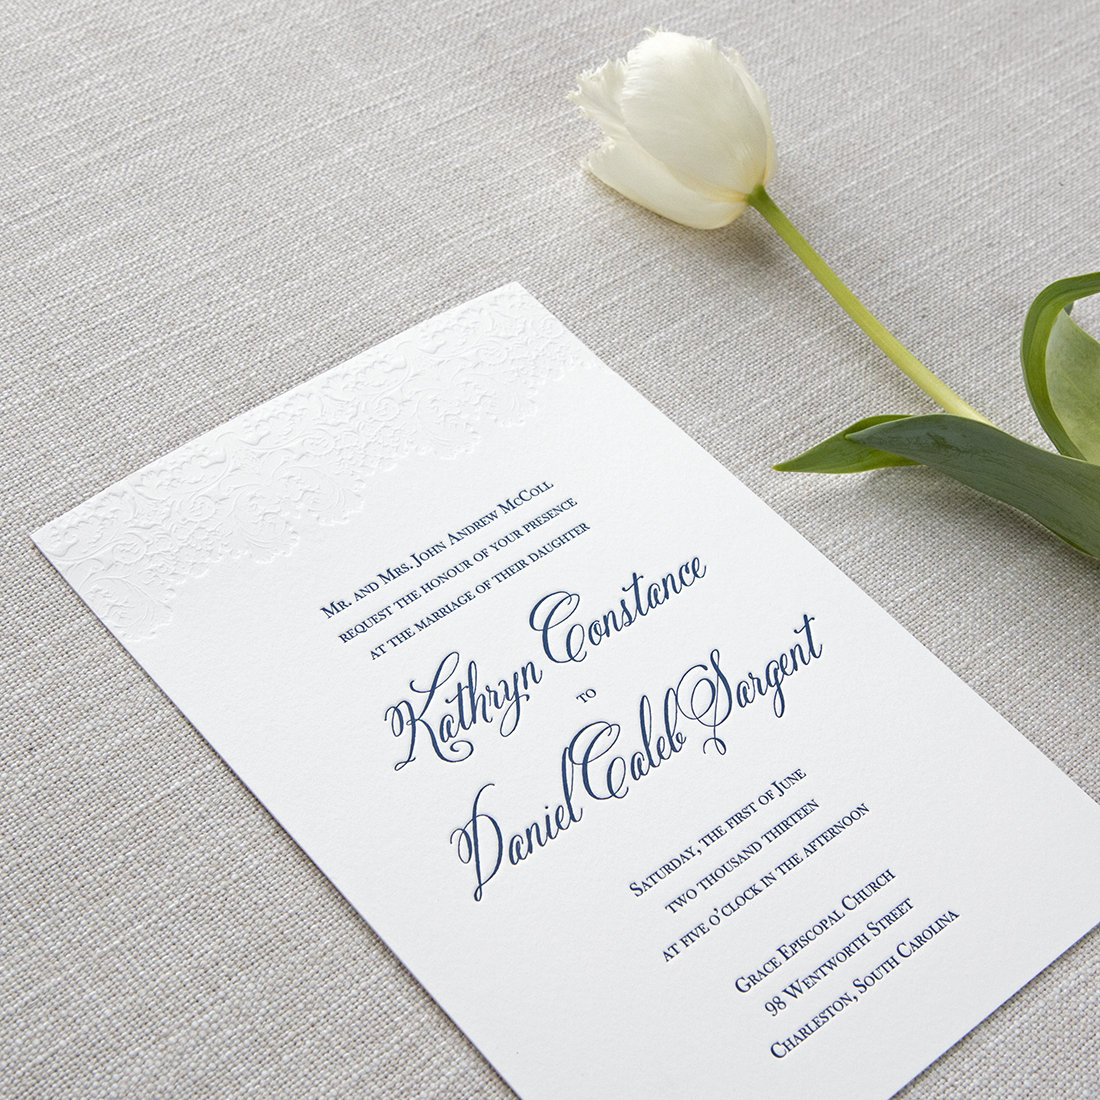 Letterpress Wedding Invitation with a lovely damask pattern to tie it all together.